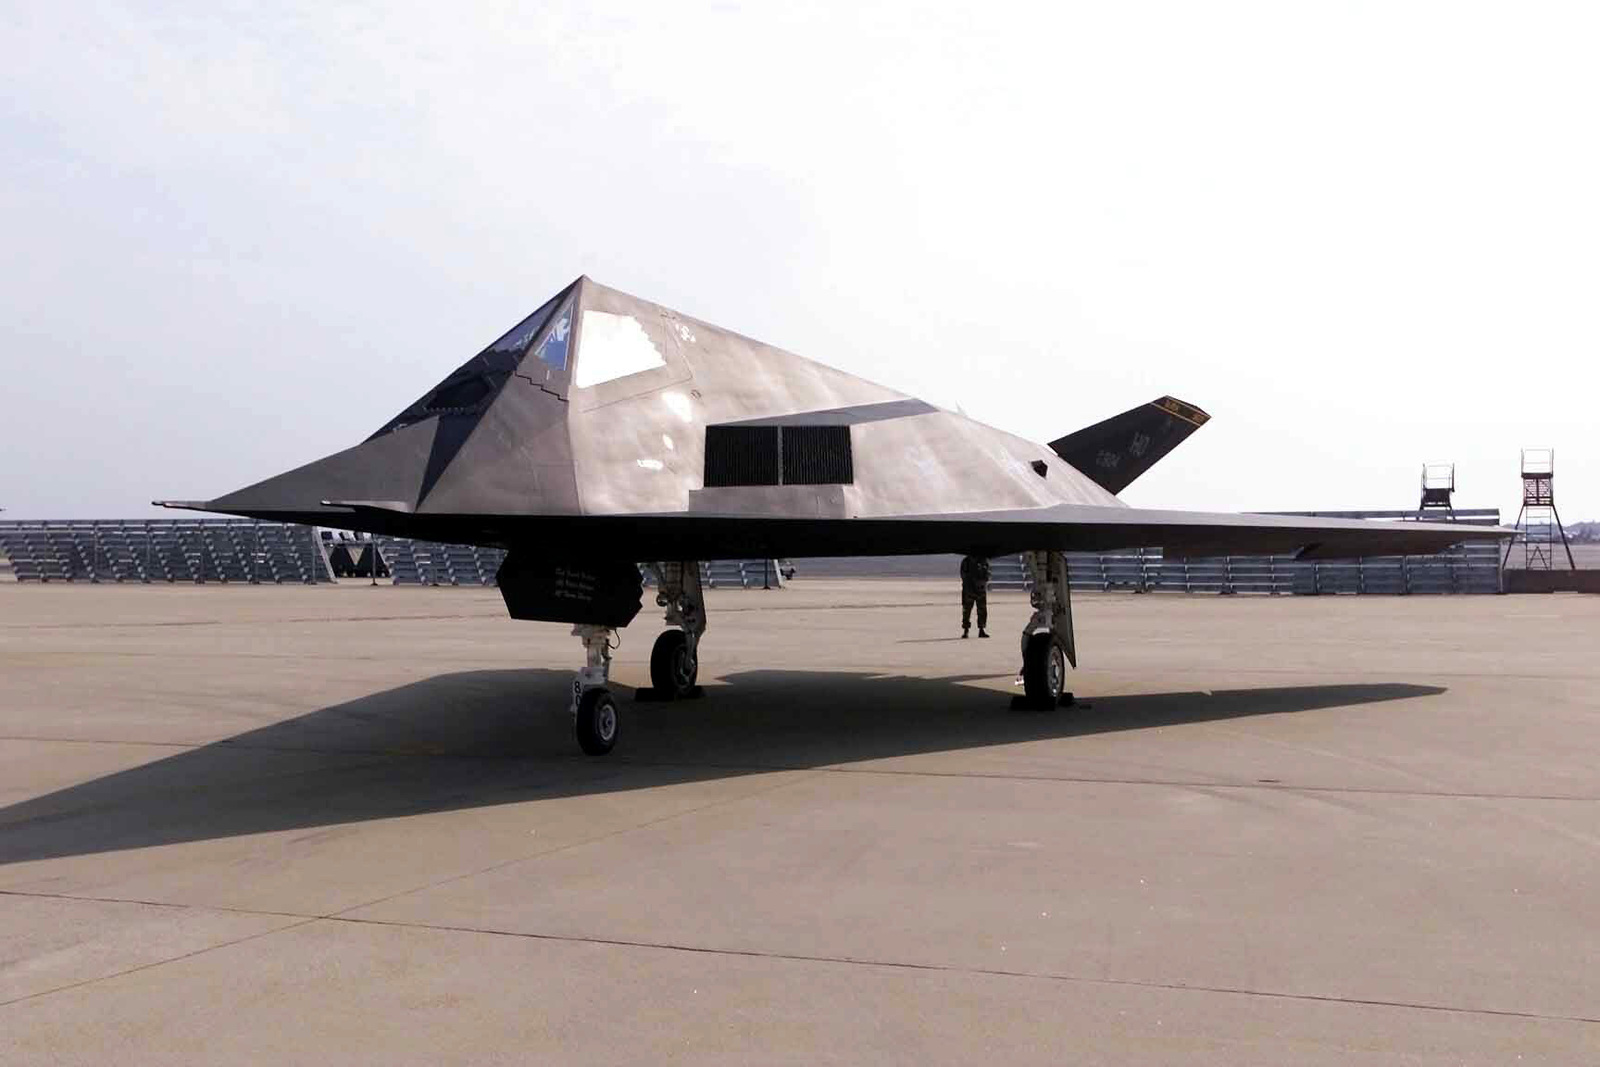 More about the F-117